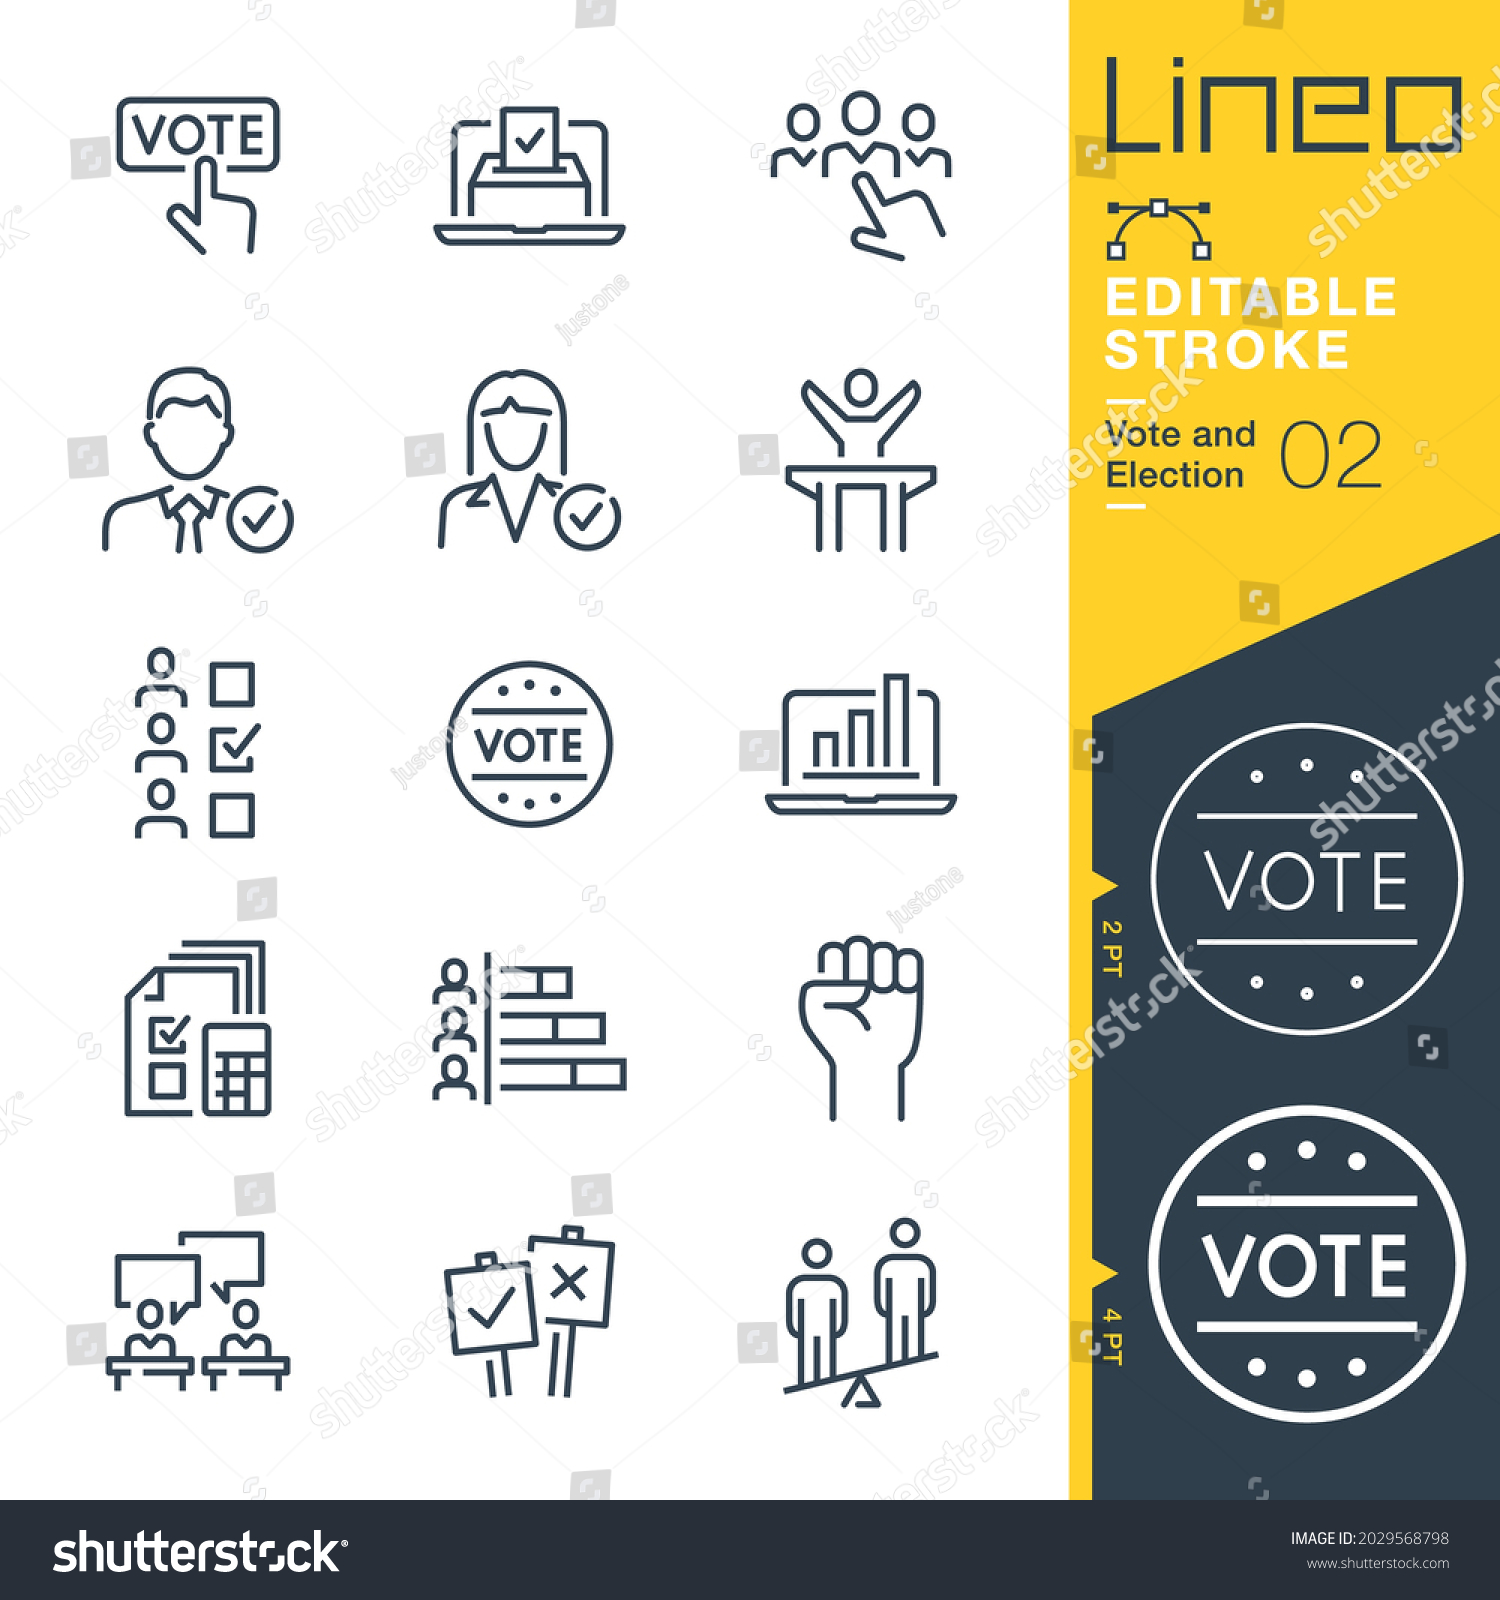 SVG of Lineo Editable Stroke - Vote and Election line icons svg